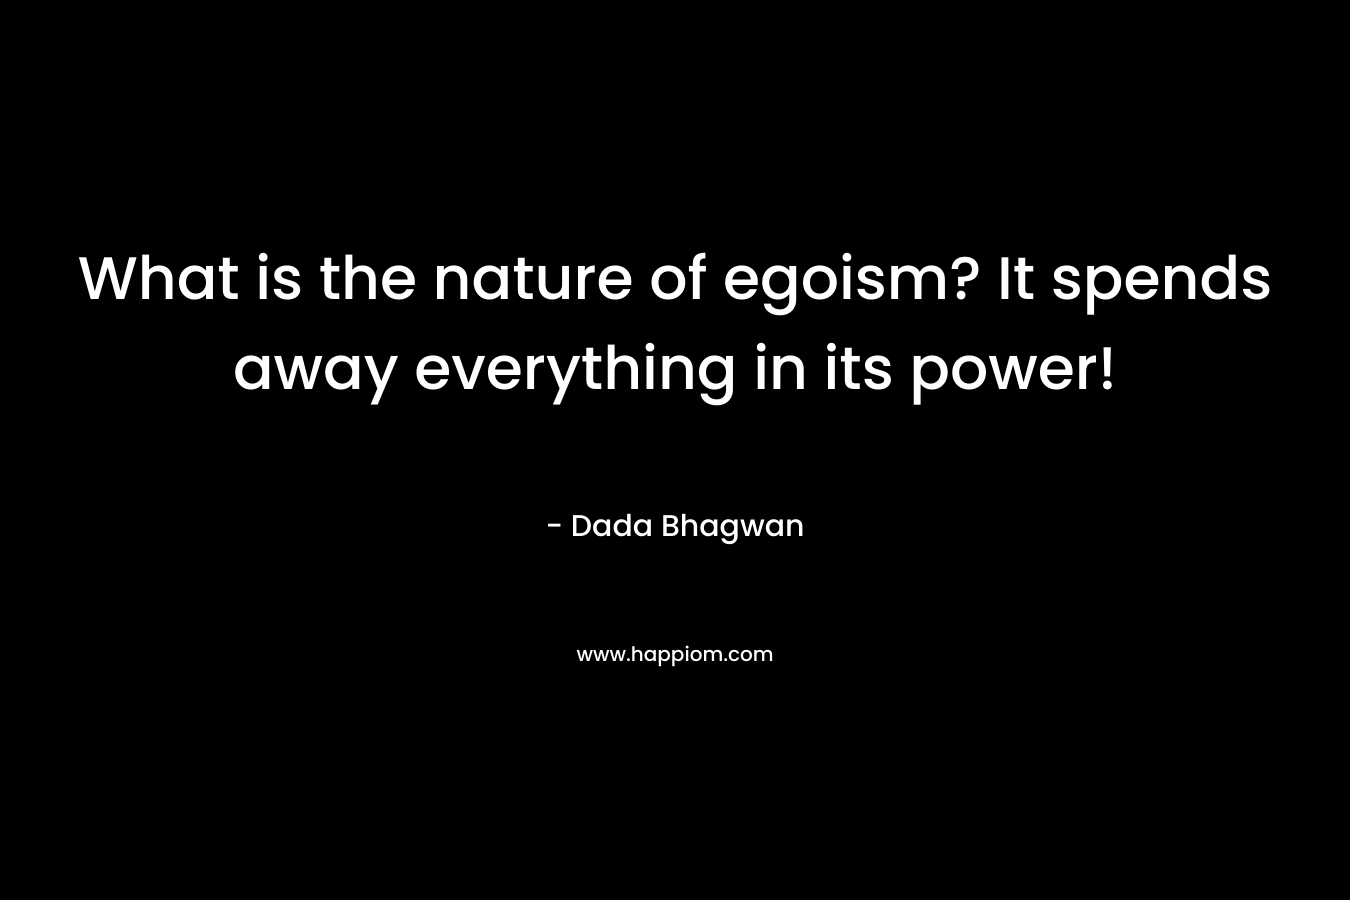 What is the nature of egoism? It spends away everything in its power! – Dada Bhagwan